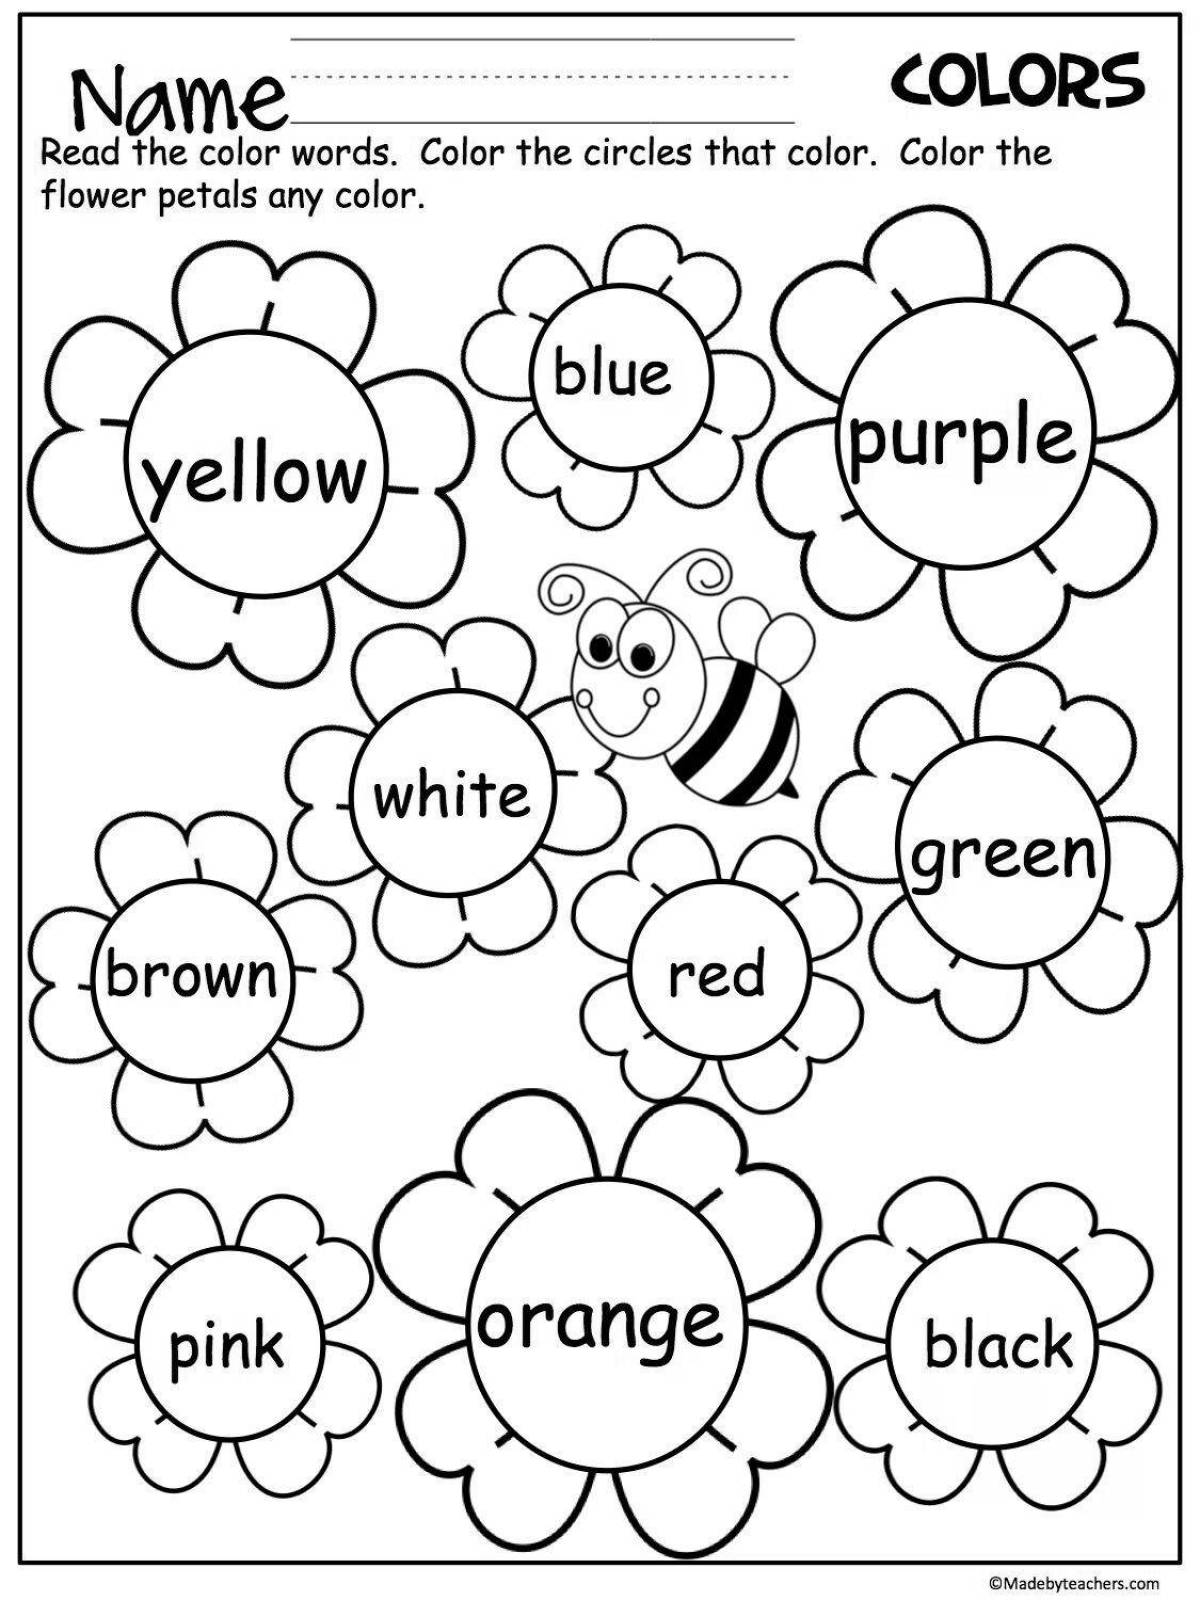 Color-splashed 4th grade english coloring book